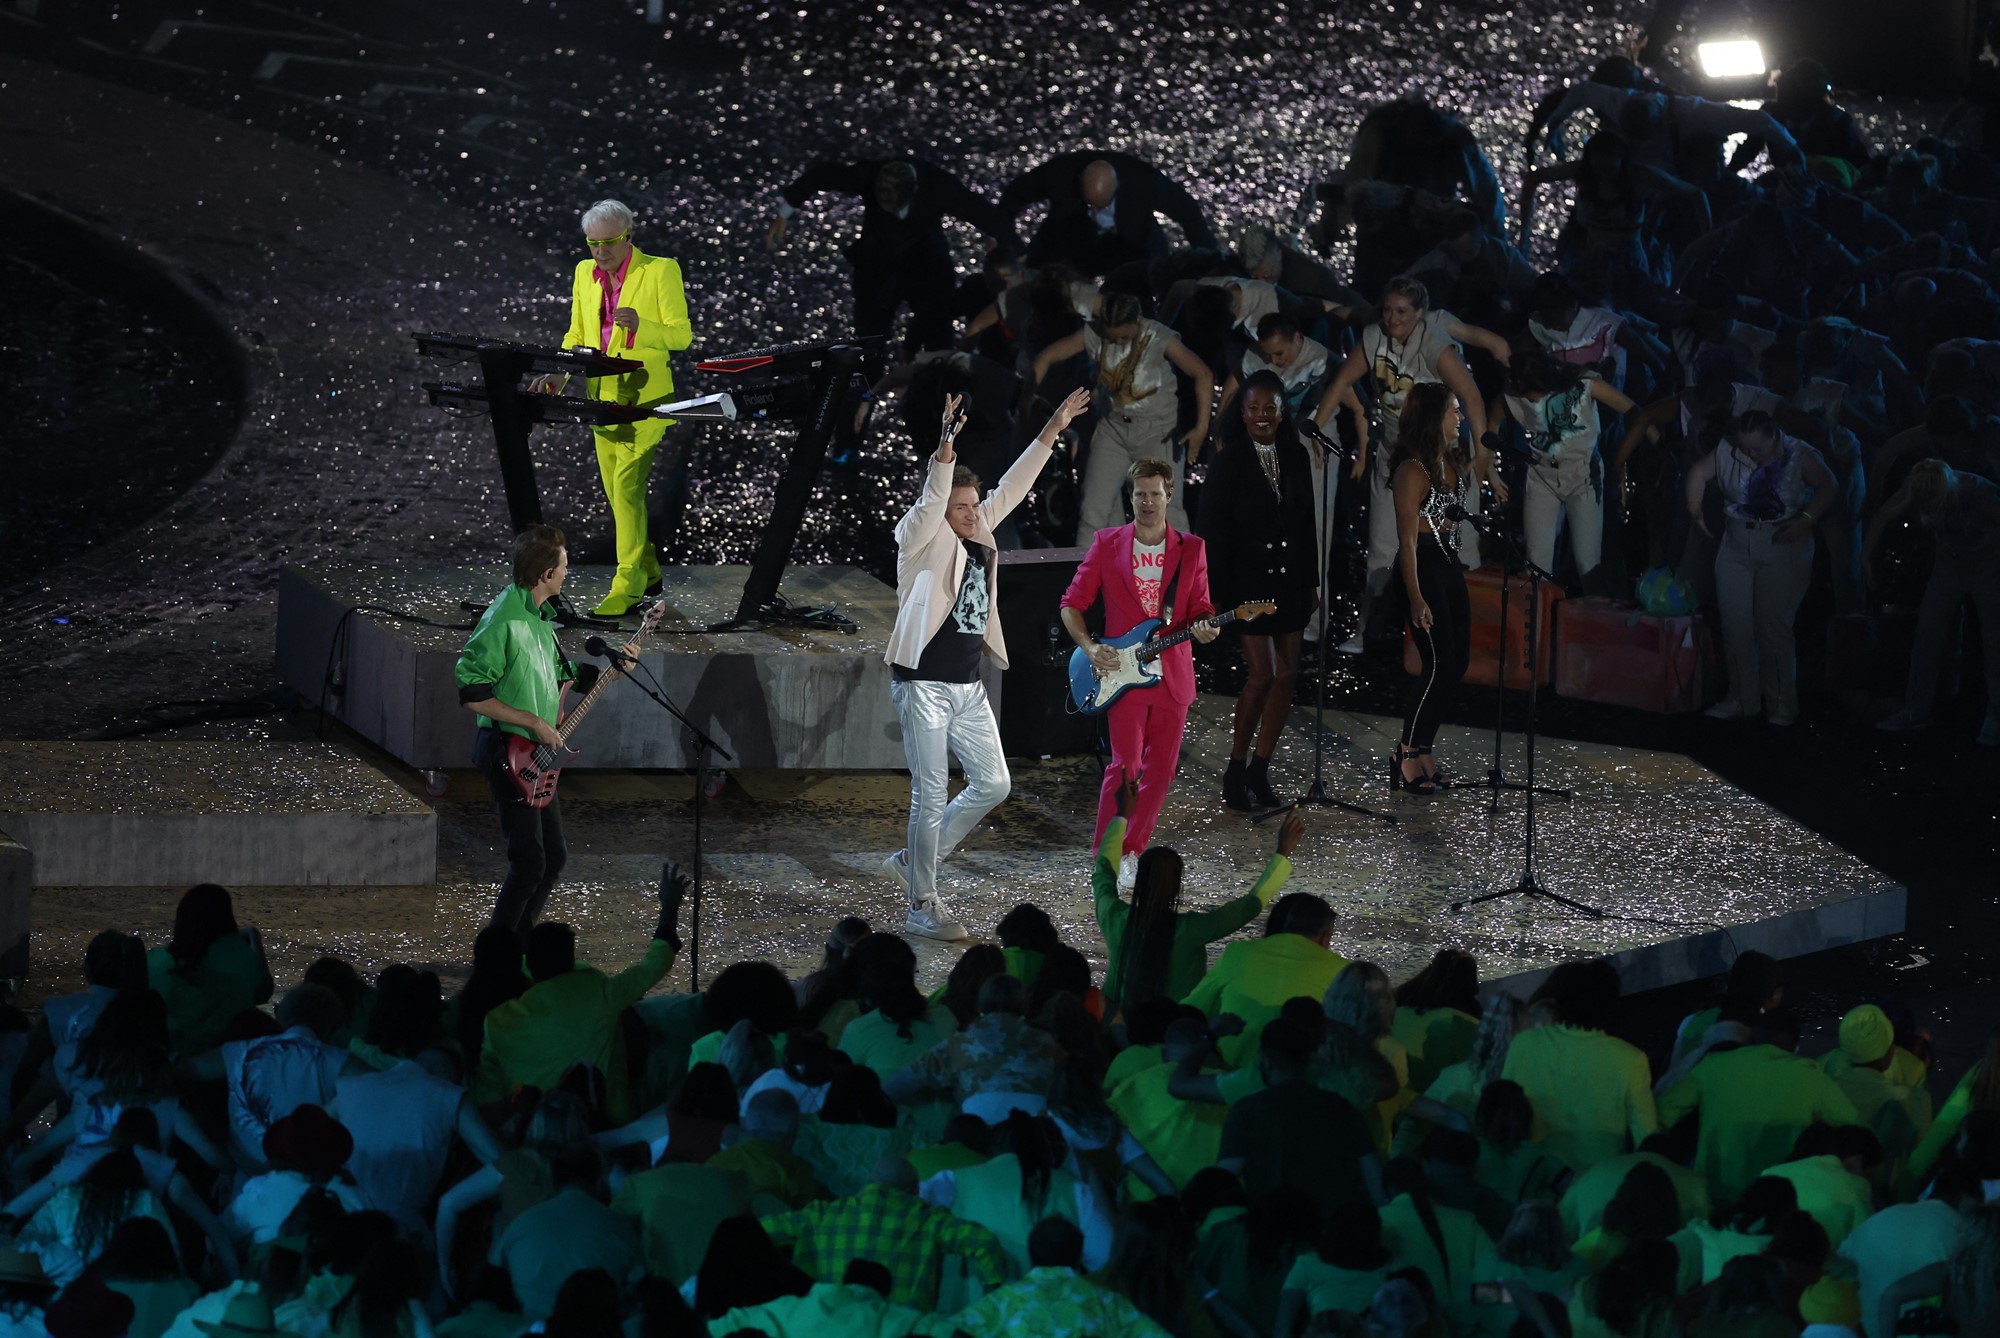 members of duran duran perform on stage in the middle of a stadium surrounded by people